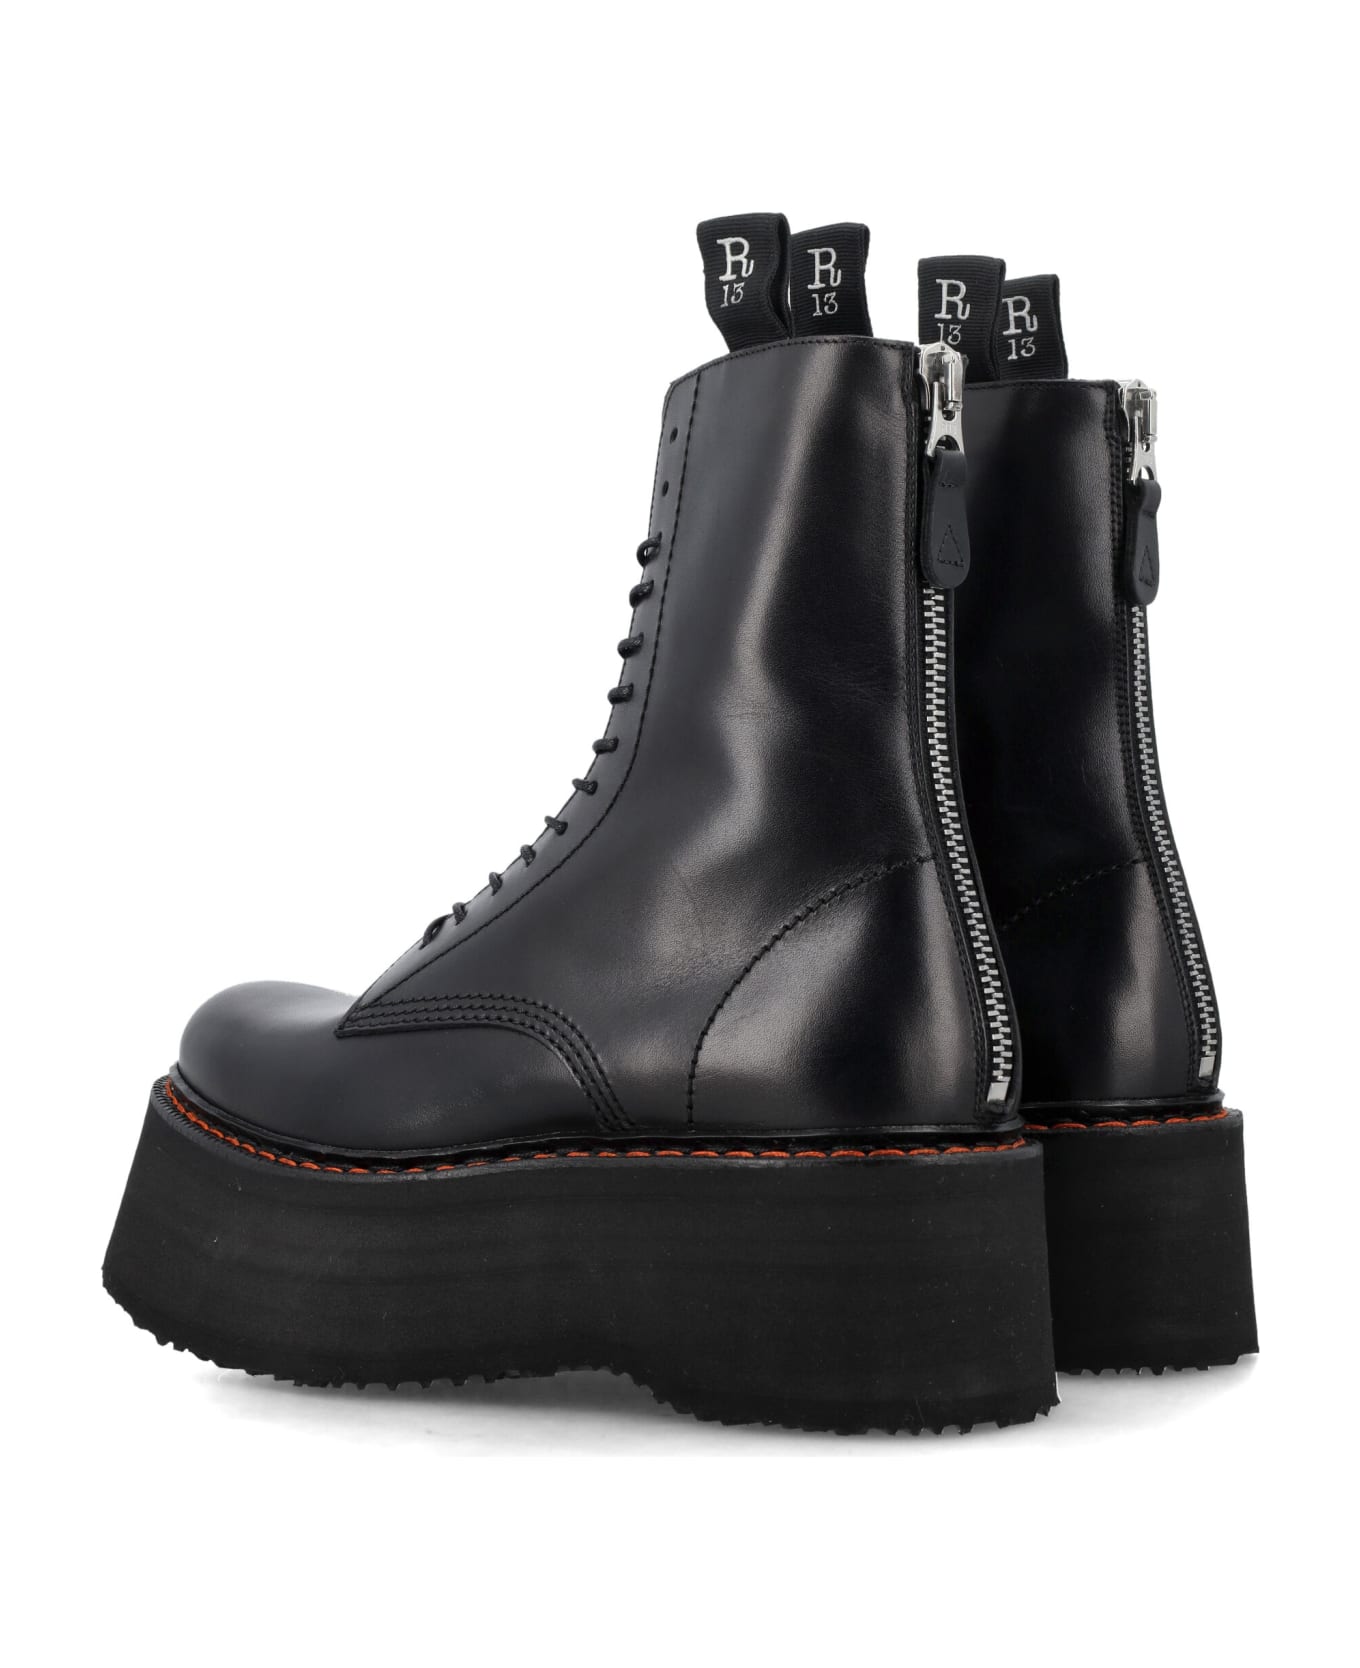 R13 Stack Boots - BLACK